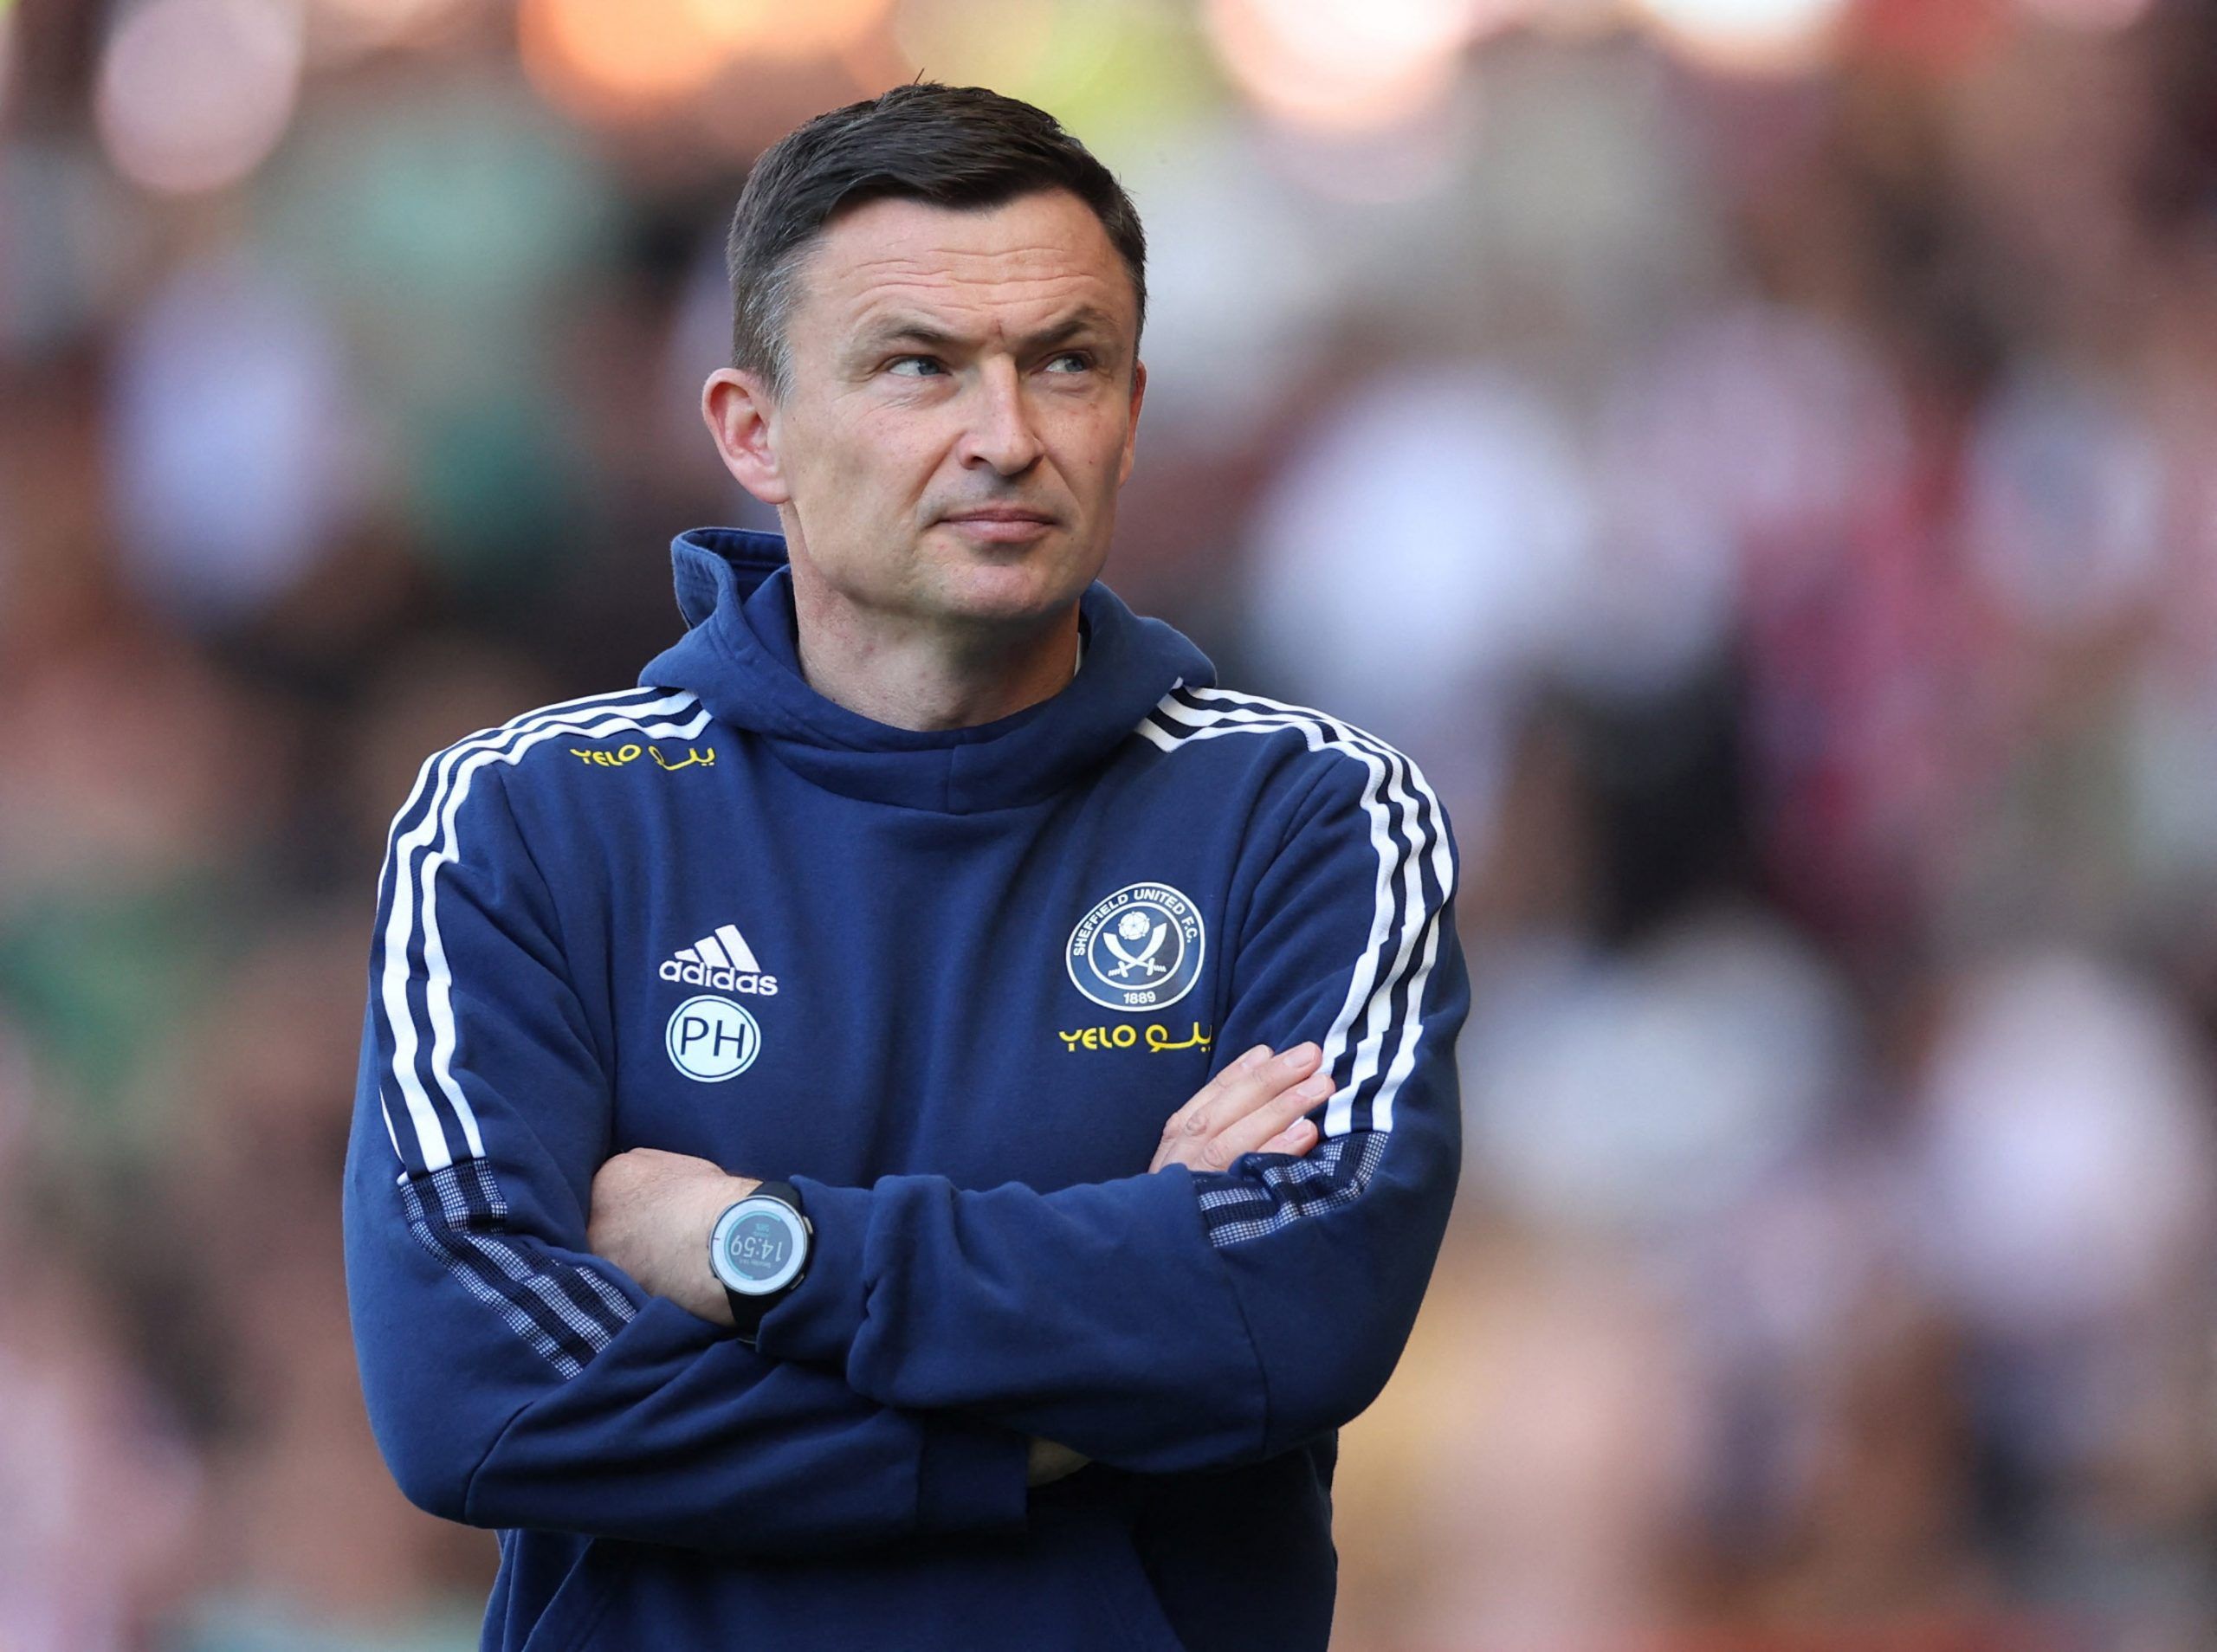 paul-heckingbottom-sheffield-united-championship-nottingham-forest-semi-final-premier-league-promotionSoccer Football - Championship - Semi Final - First Leg - Sheffield United v Nottingham Forest - Bramall Lane, Sheffield, Britain - May 14, 2022 Sheffield United manager Paul Heckingbottom before the match Action Images via Reuters/Carl Recine EDITORIAL USE ONLY. No use with unauthorized audio, video, data, fixture lists, club/league logos or 'live' services. Online in-match use limited to 75 im